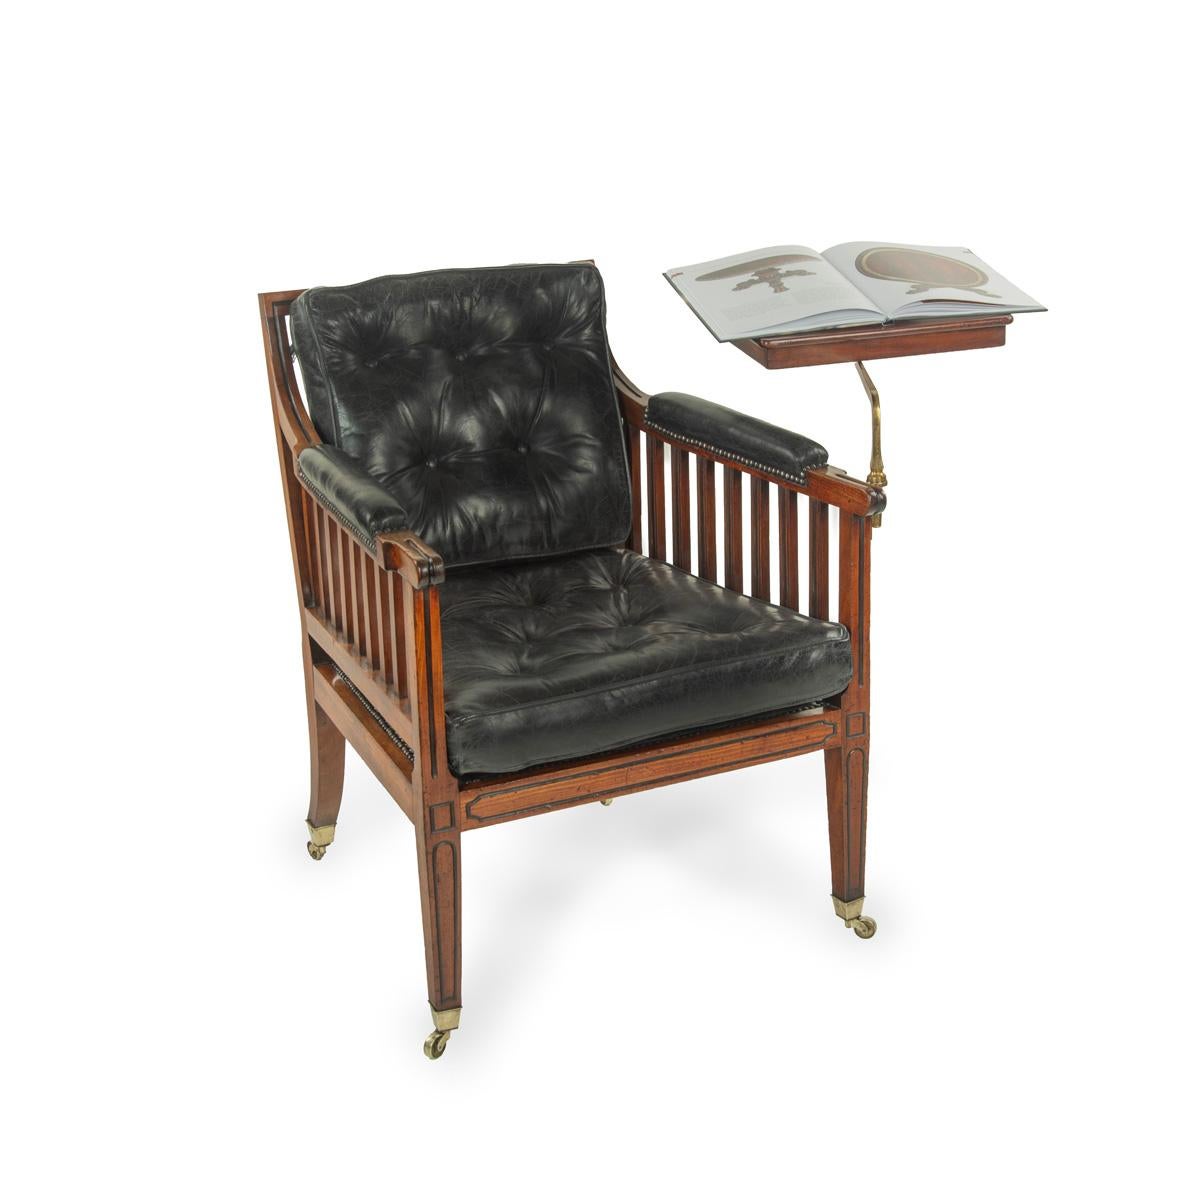 A Regency mahogany library reading chair, of rectangular form with slatted back and sides, with two deep buttoned cushions and padded elbow rests re-upholstered in distressed black leather, all four legs square in section, the front pair and seat